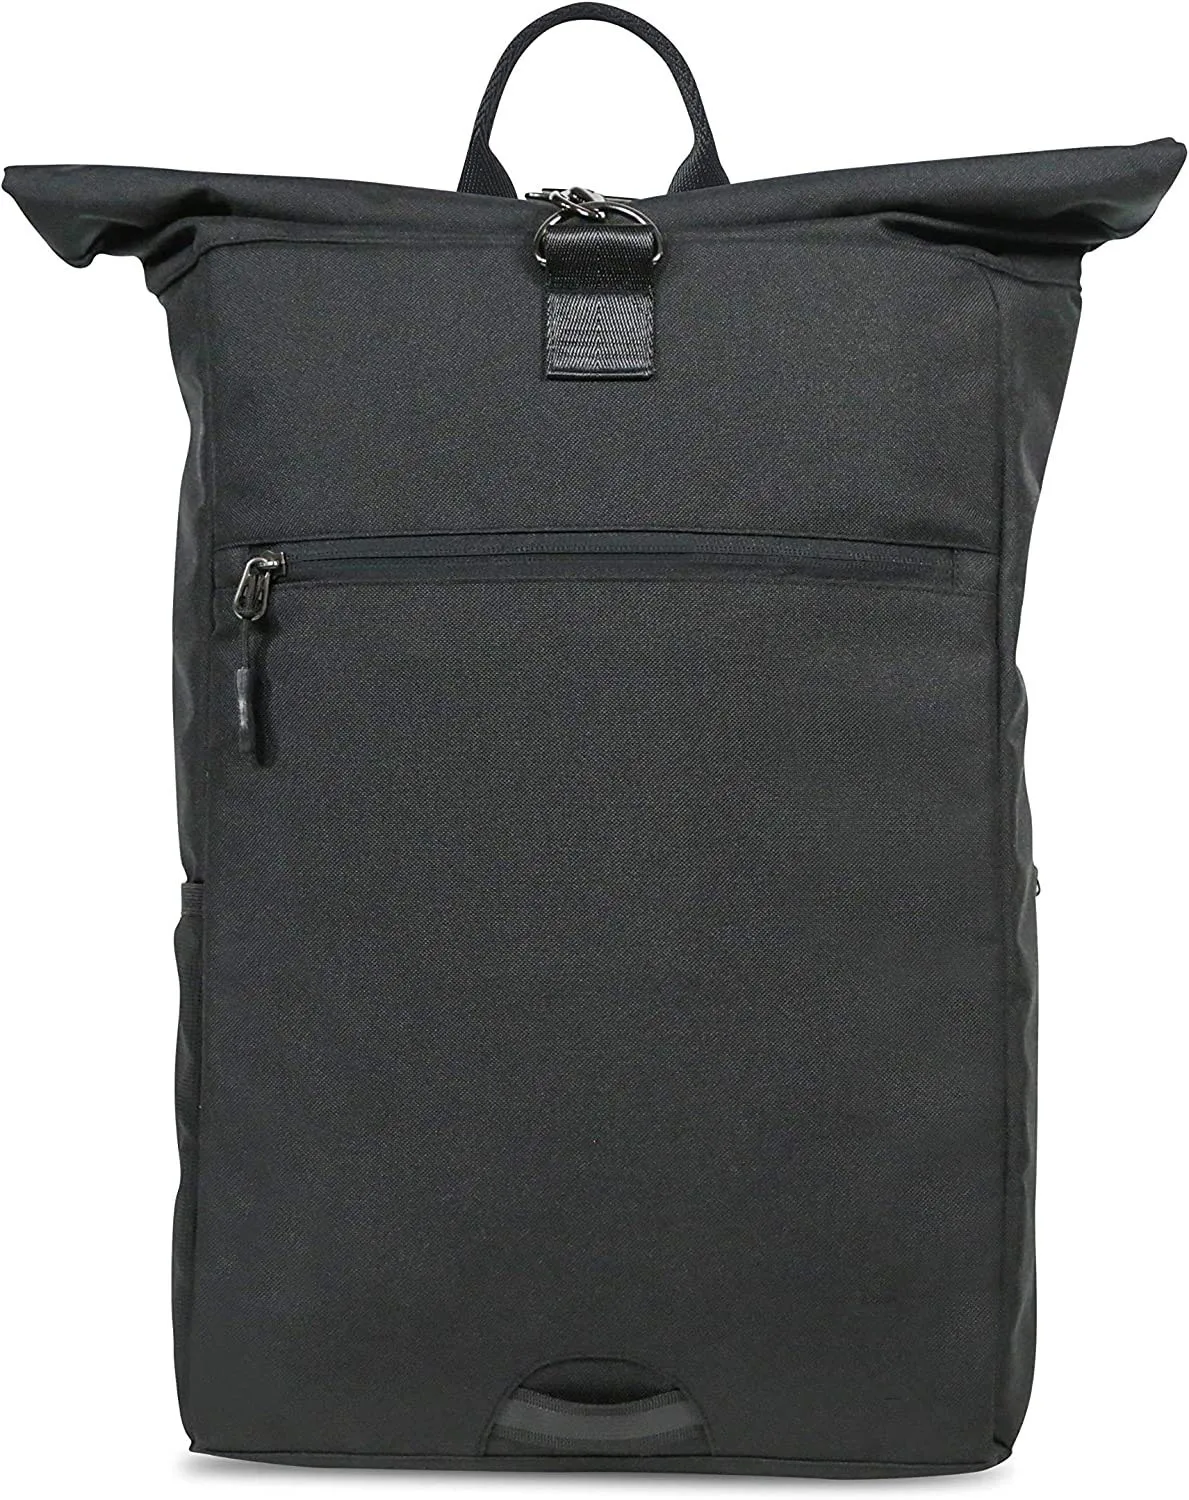 Hot Selling Recycled Rolltop Laptop Rucksack RPET Thoughtful Sustainable with Laptop Compartment Anti Theft Bag